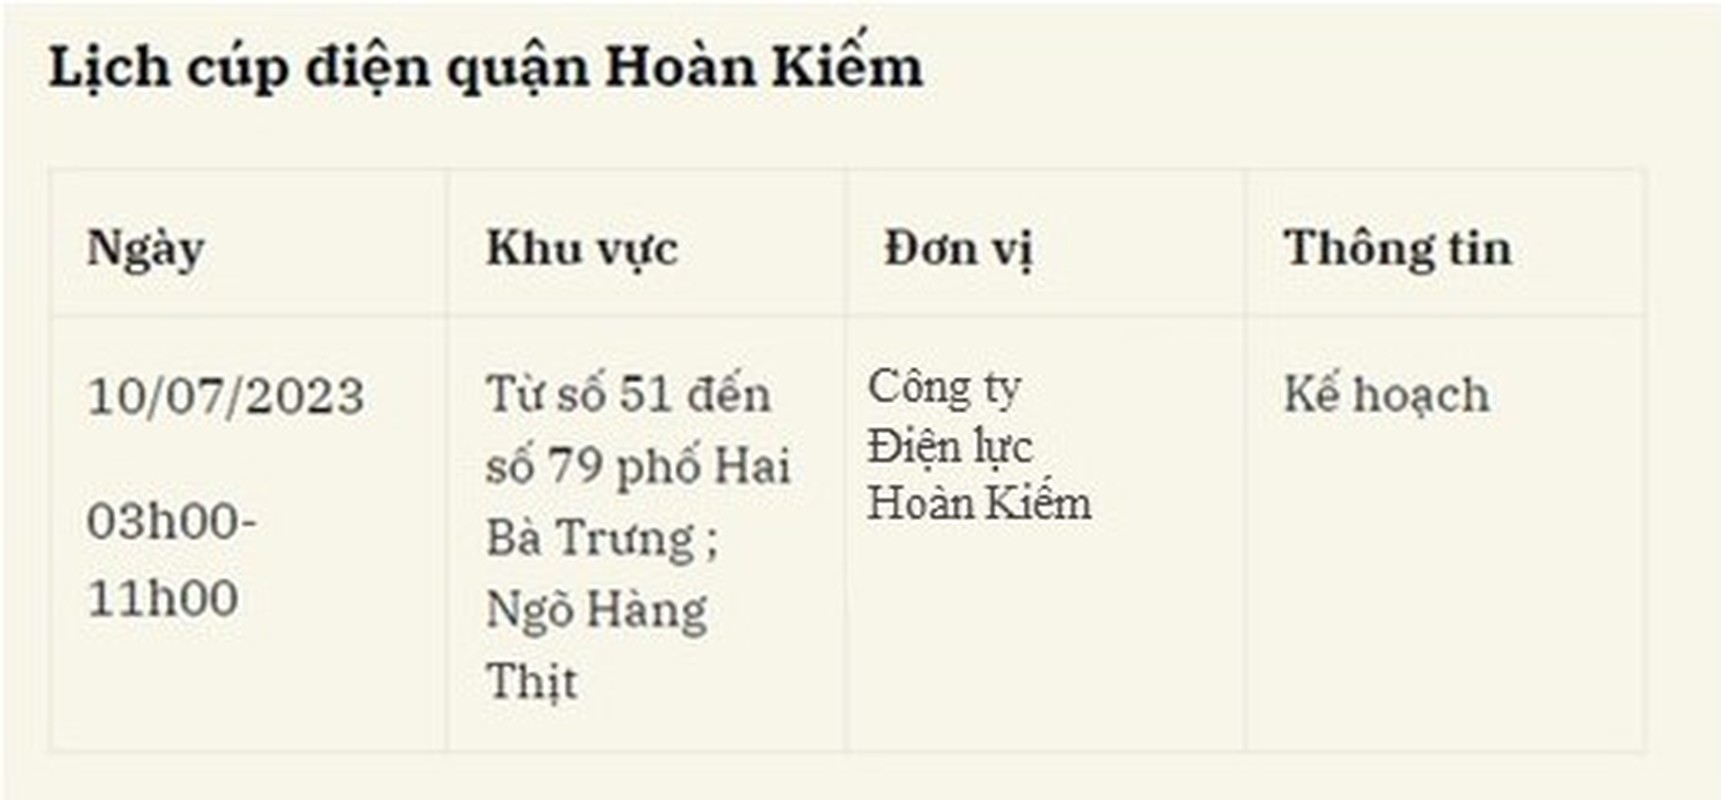 Lich cup dien Ha Noi ngay 10/7/2023-Hinh-2